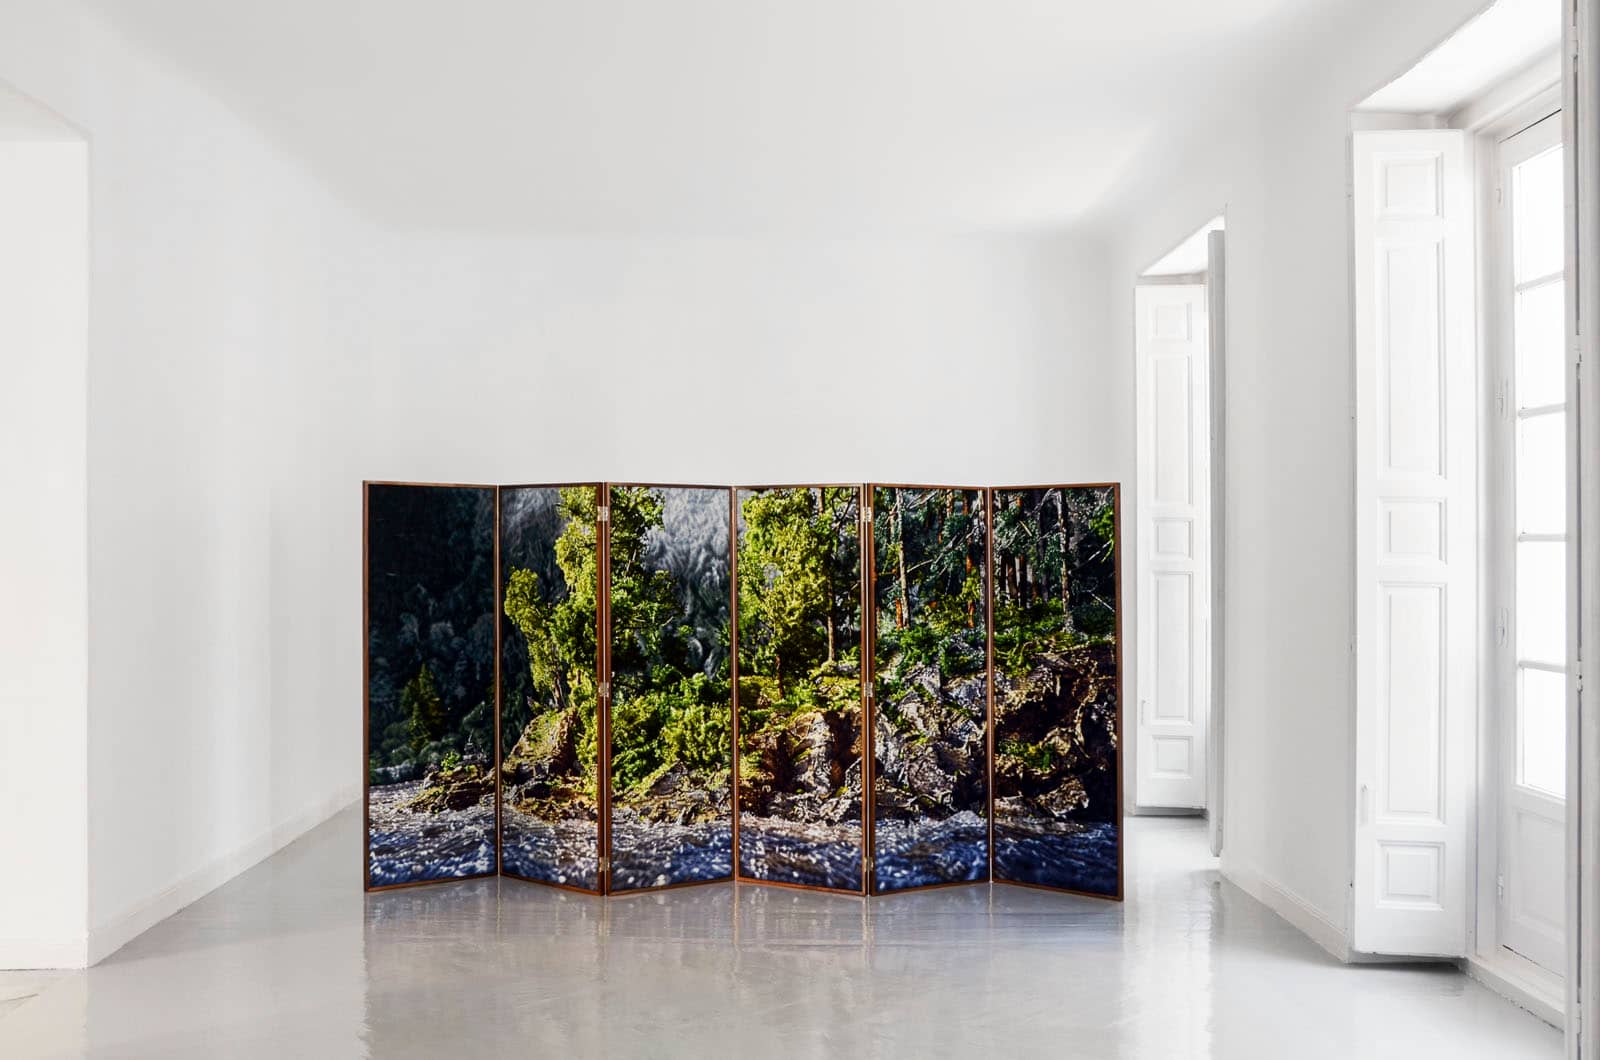 Exhibition view from Philipp Fröhlich's solo show "HOAP of a Tree" at Juana de Aizpuru gallery in Madrid, showing a paravent with a painting in tempera showing the island of Utoya.